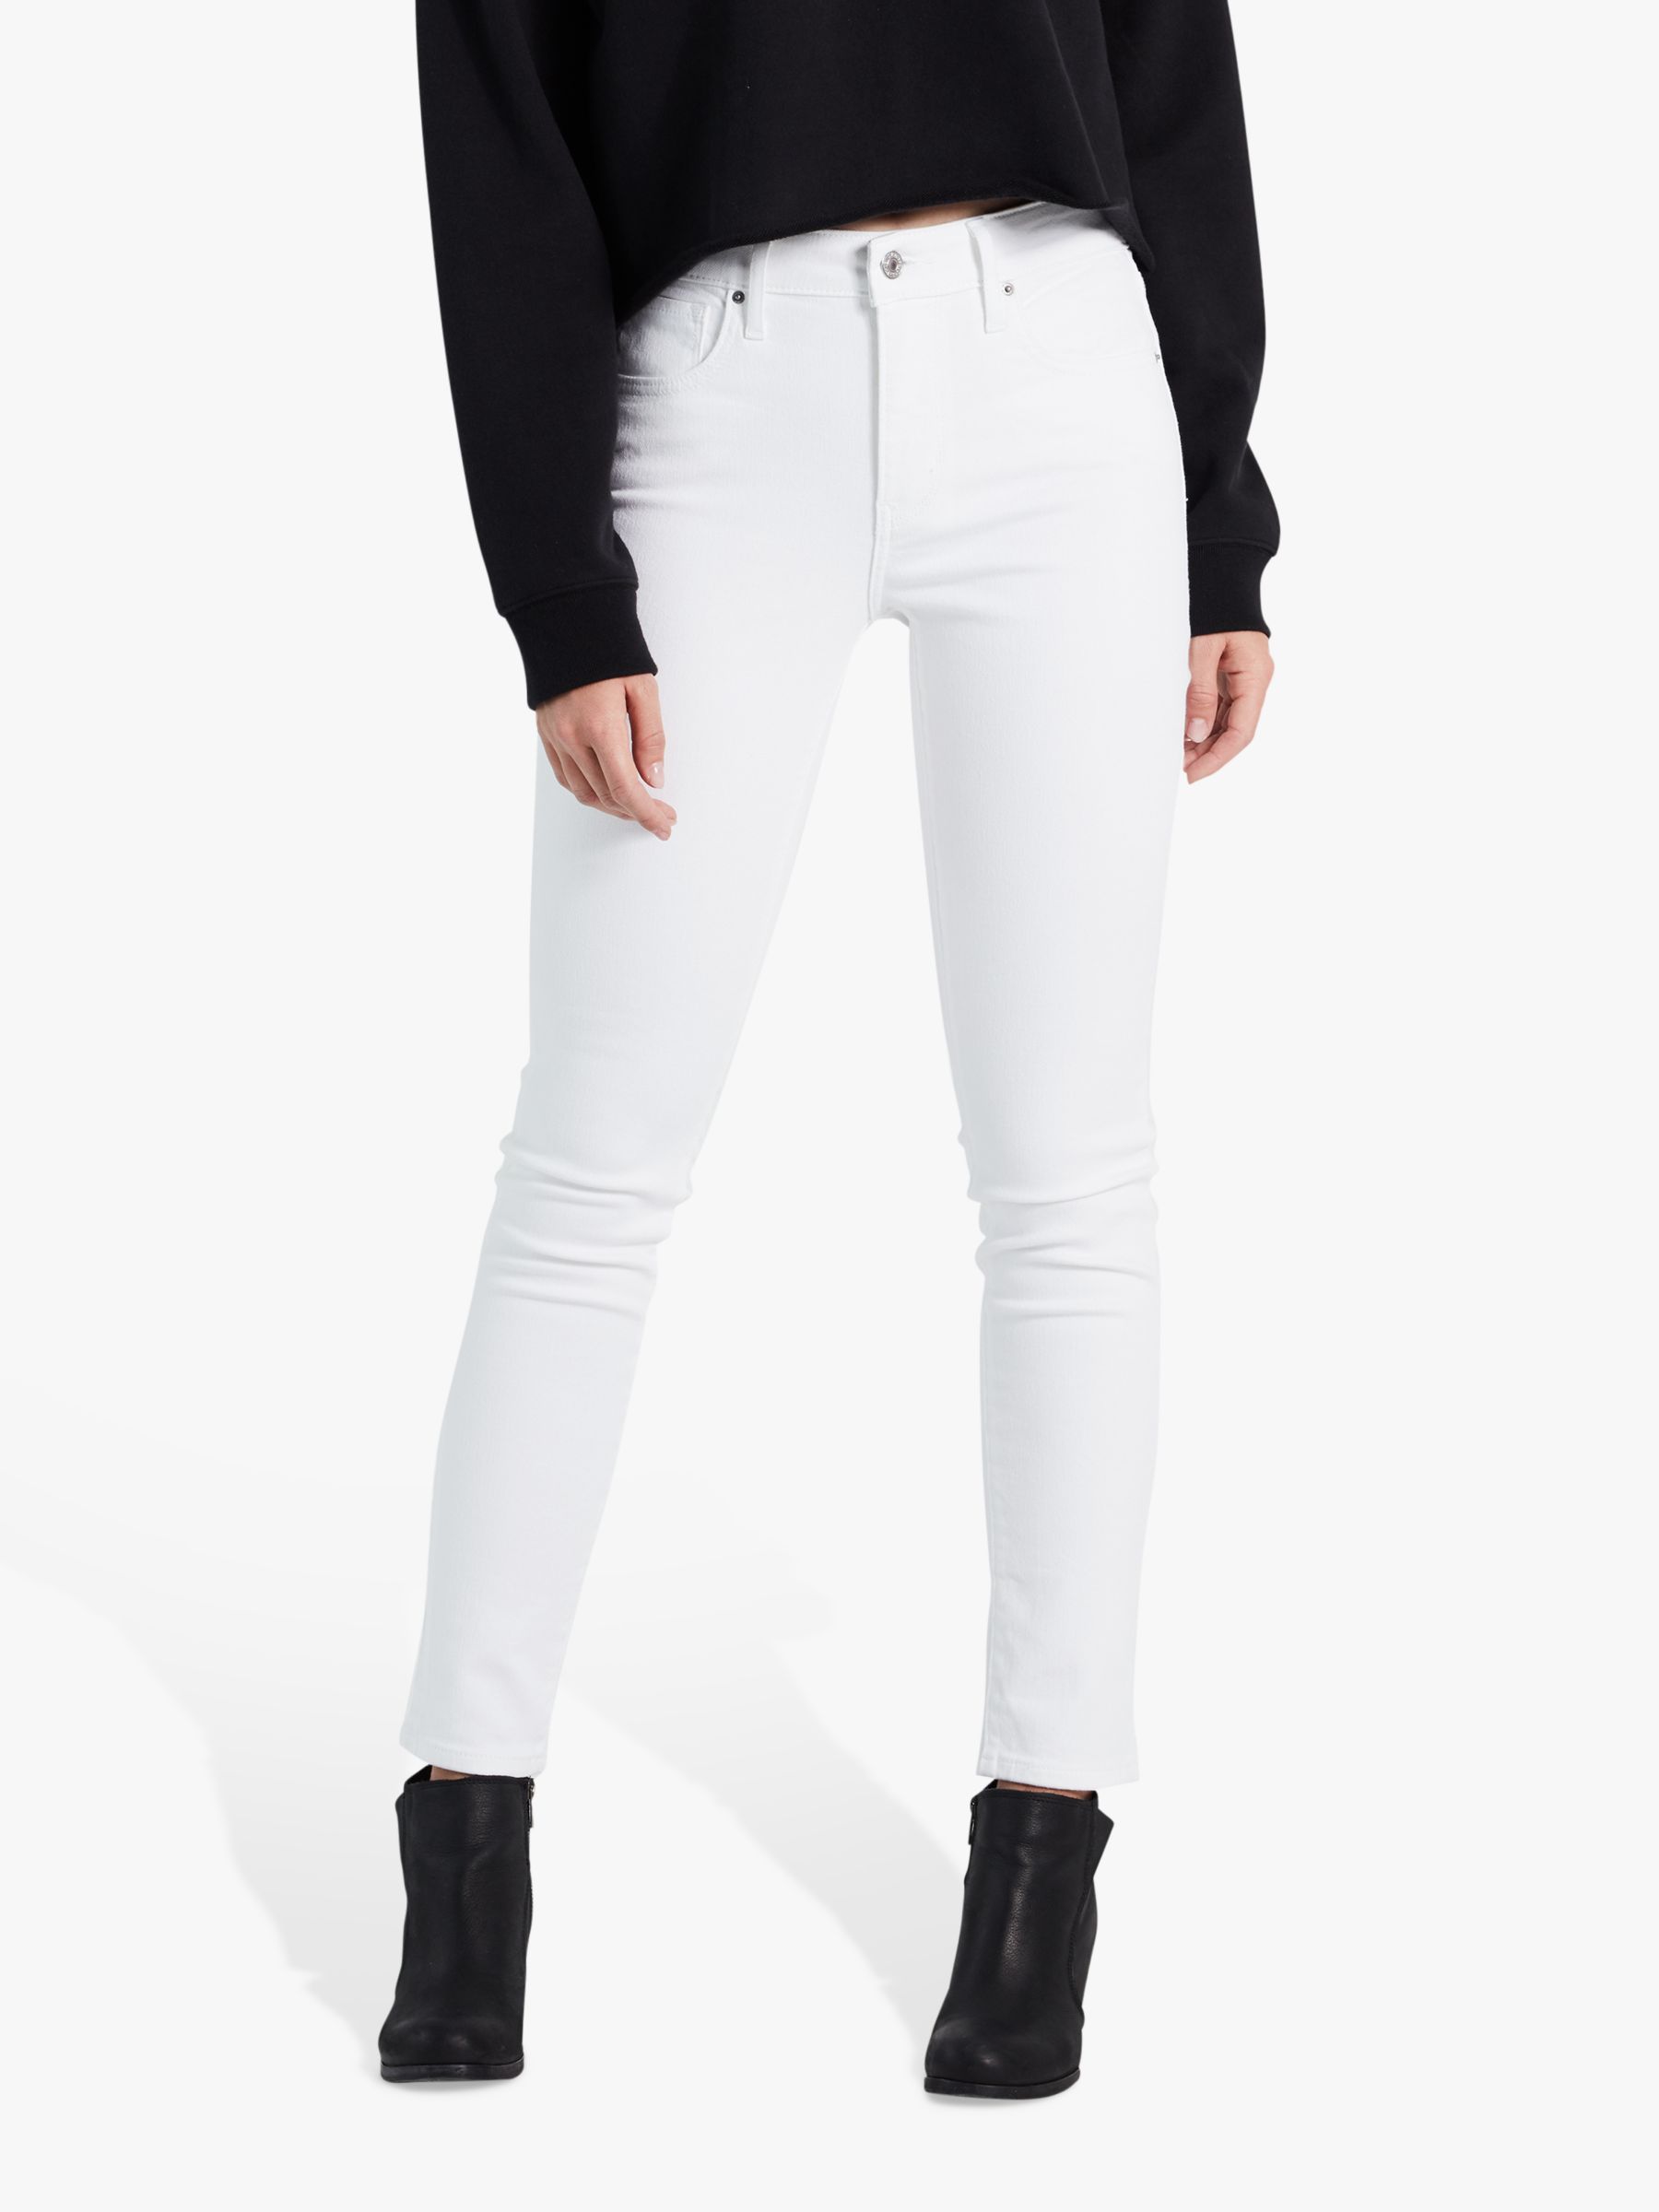 Levi's 721 High Rise Skinny Jeans 